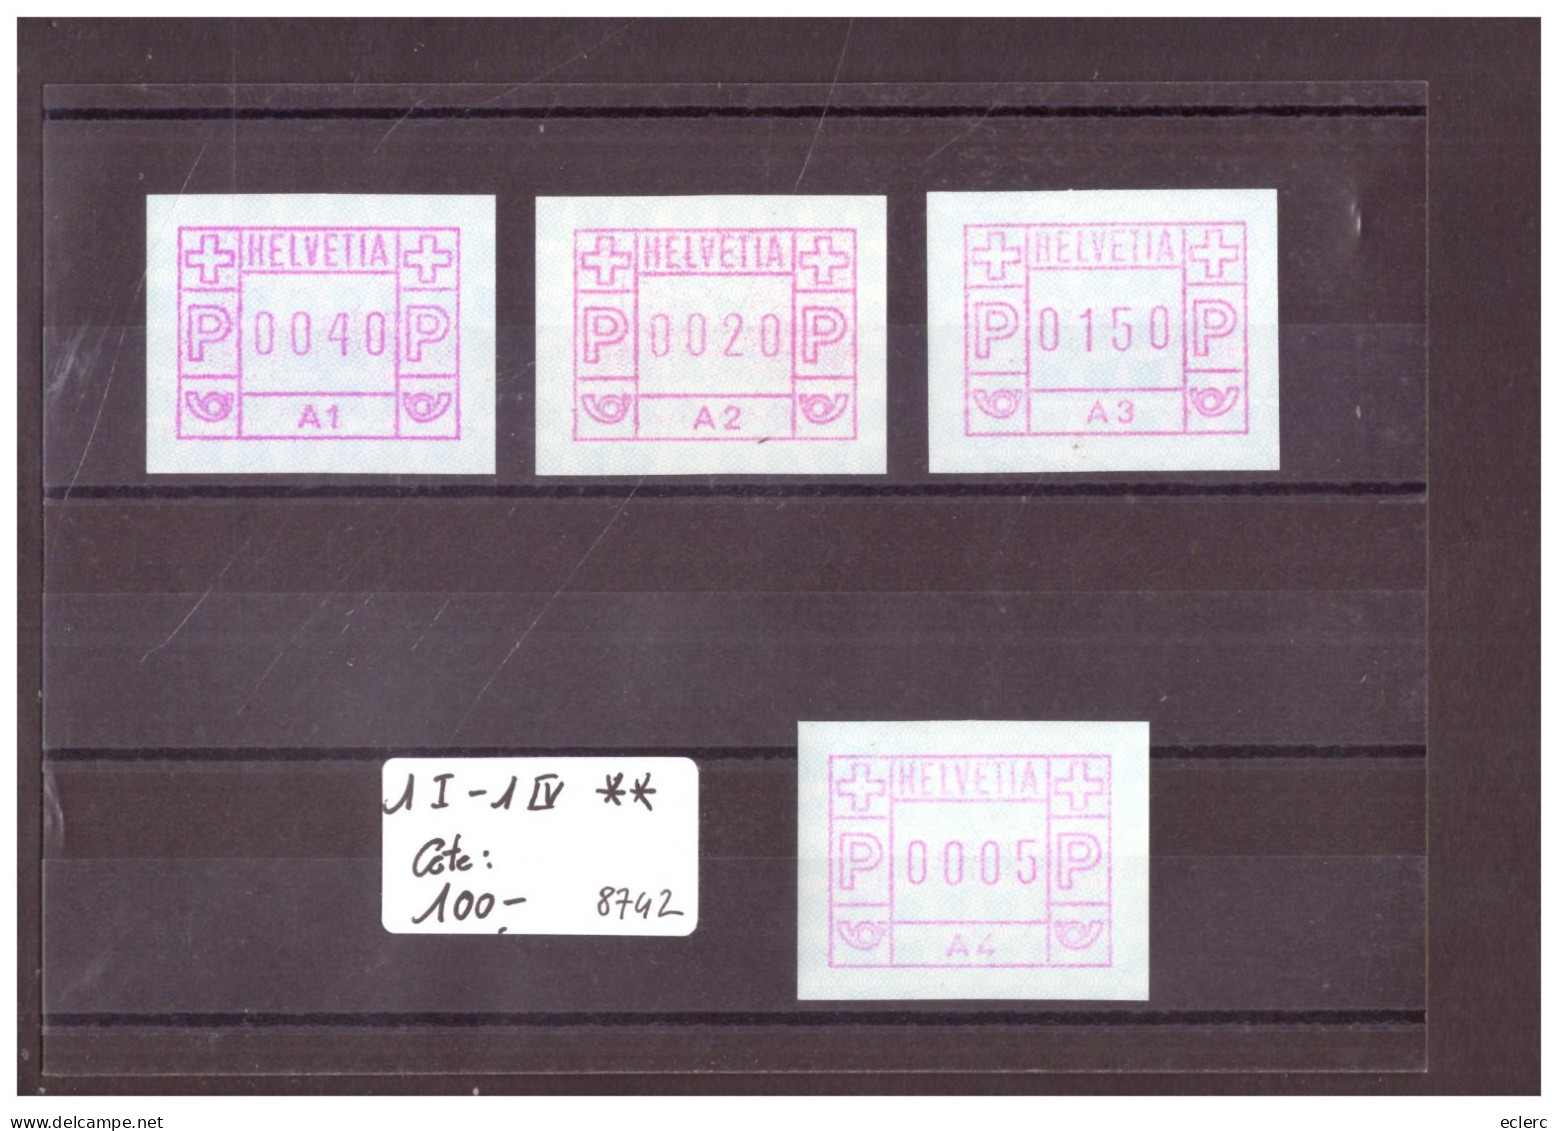 AUTOMATE - No 1I - 1IV ** - 4 TIMBRES A1, A2, A3, A4 - COTE 100.- - Automatic Stamps